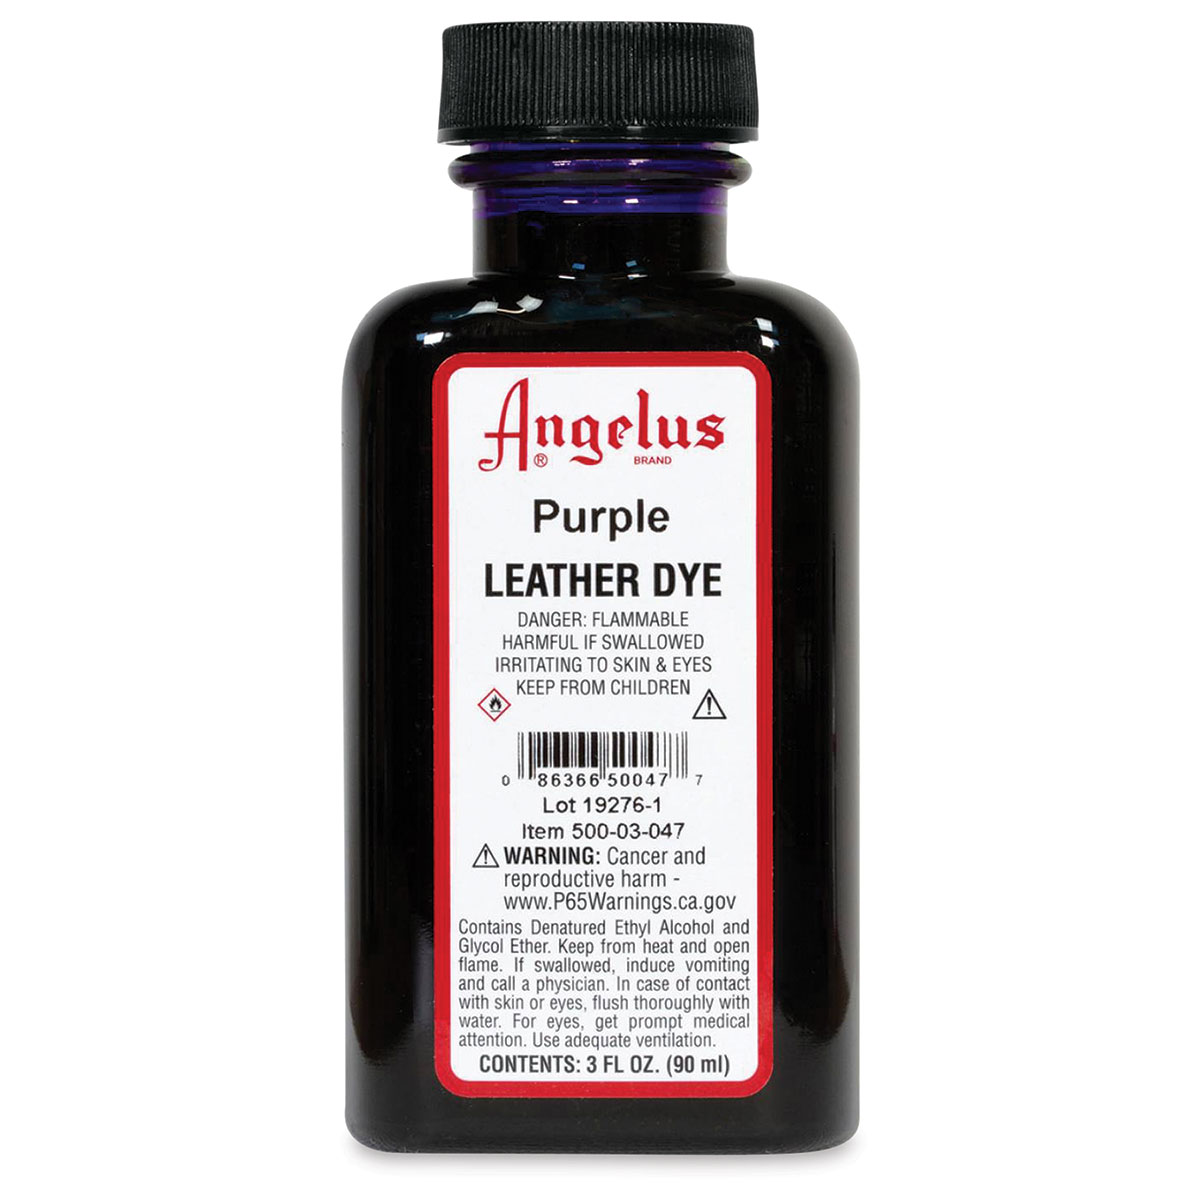 Angelus Leather Dye - Neutral (Diluting Agent), 3 oz, Bottle